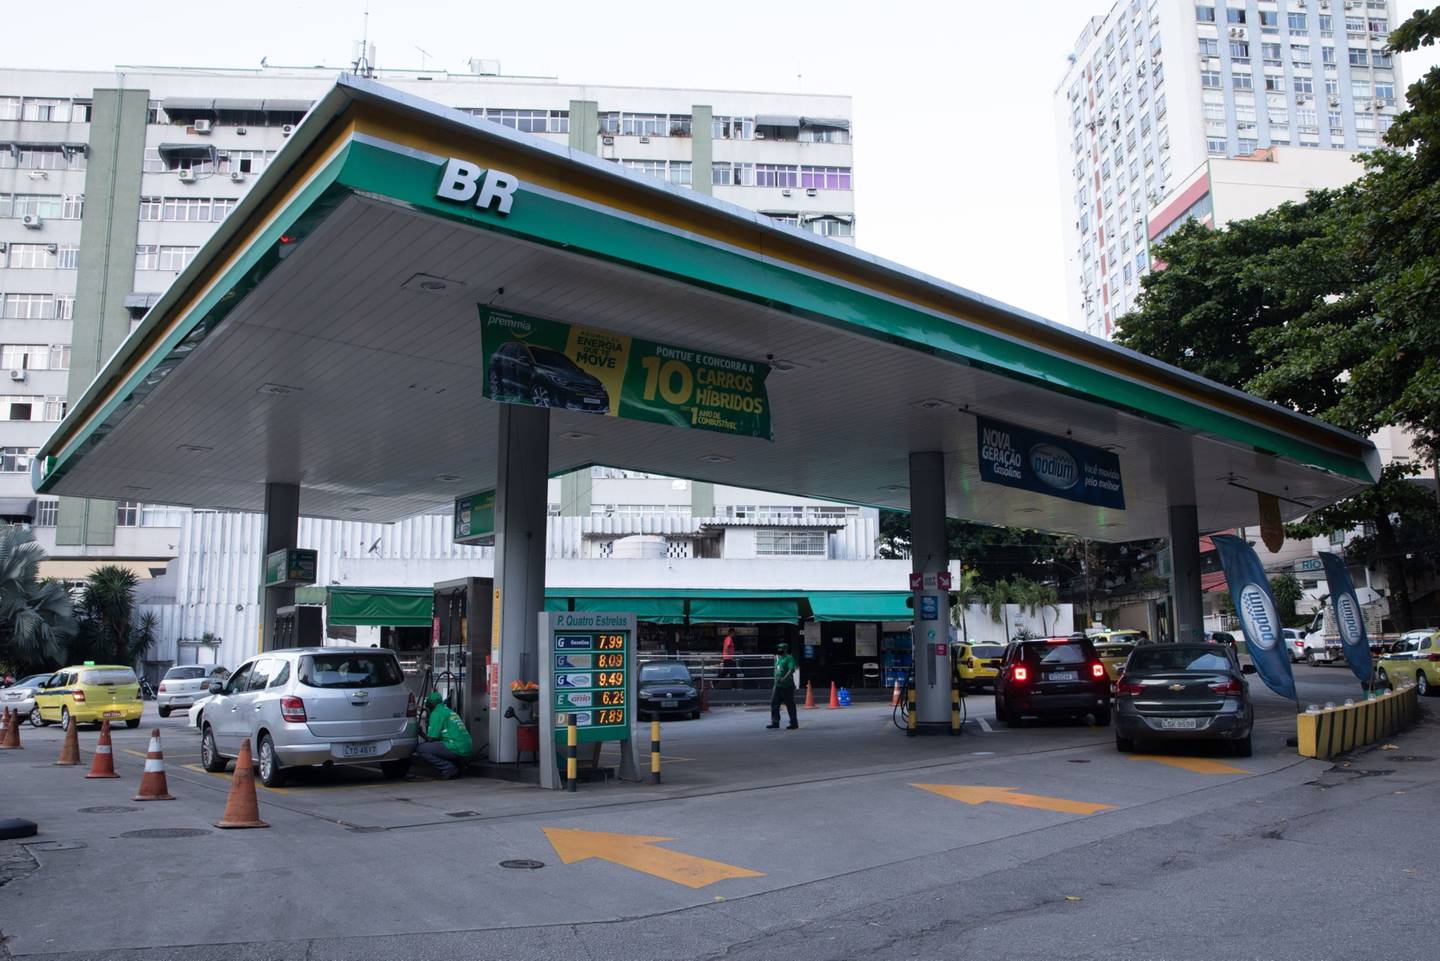 Signage outside a Petroleo Brasileiro SA (Petrobras) gas station in Rio de Janeiro, Brazil, on Friday, June 17, 2022. Brazil's state-controlled oil giant Petrobras increased fuel prices in a political setback for President Jair Bolsonaro, who is fighting to contain inflation in an election year.